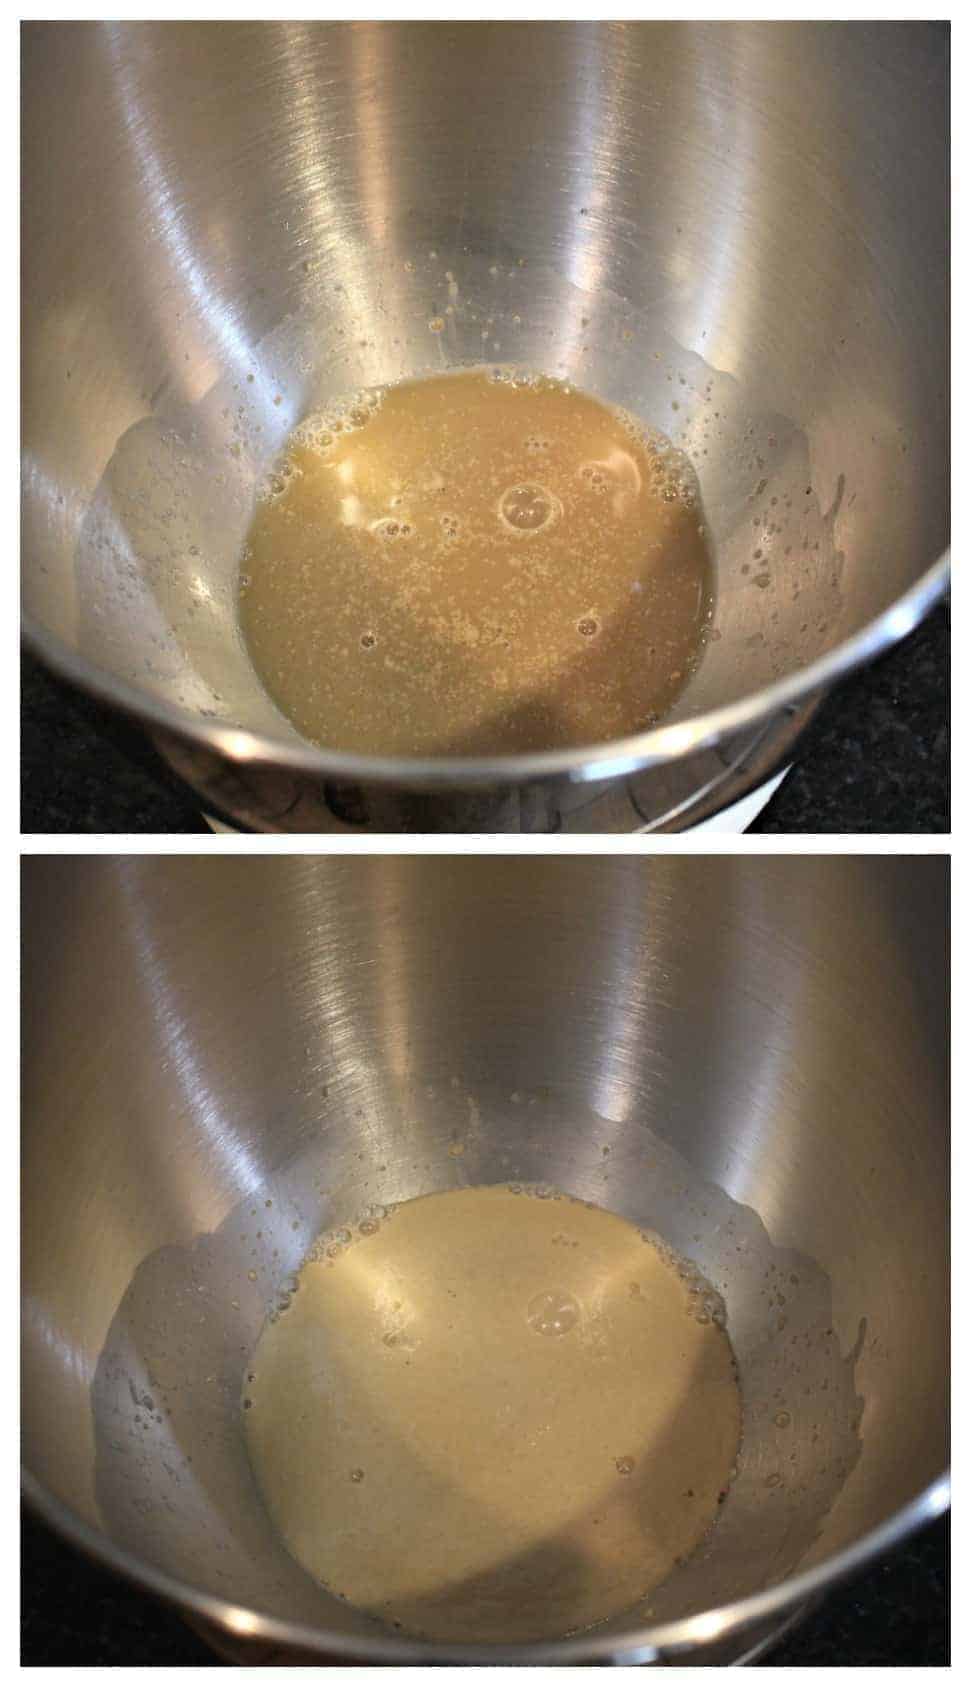 proofing the yeast in mixer bowl